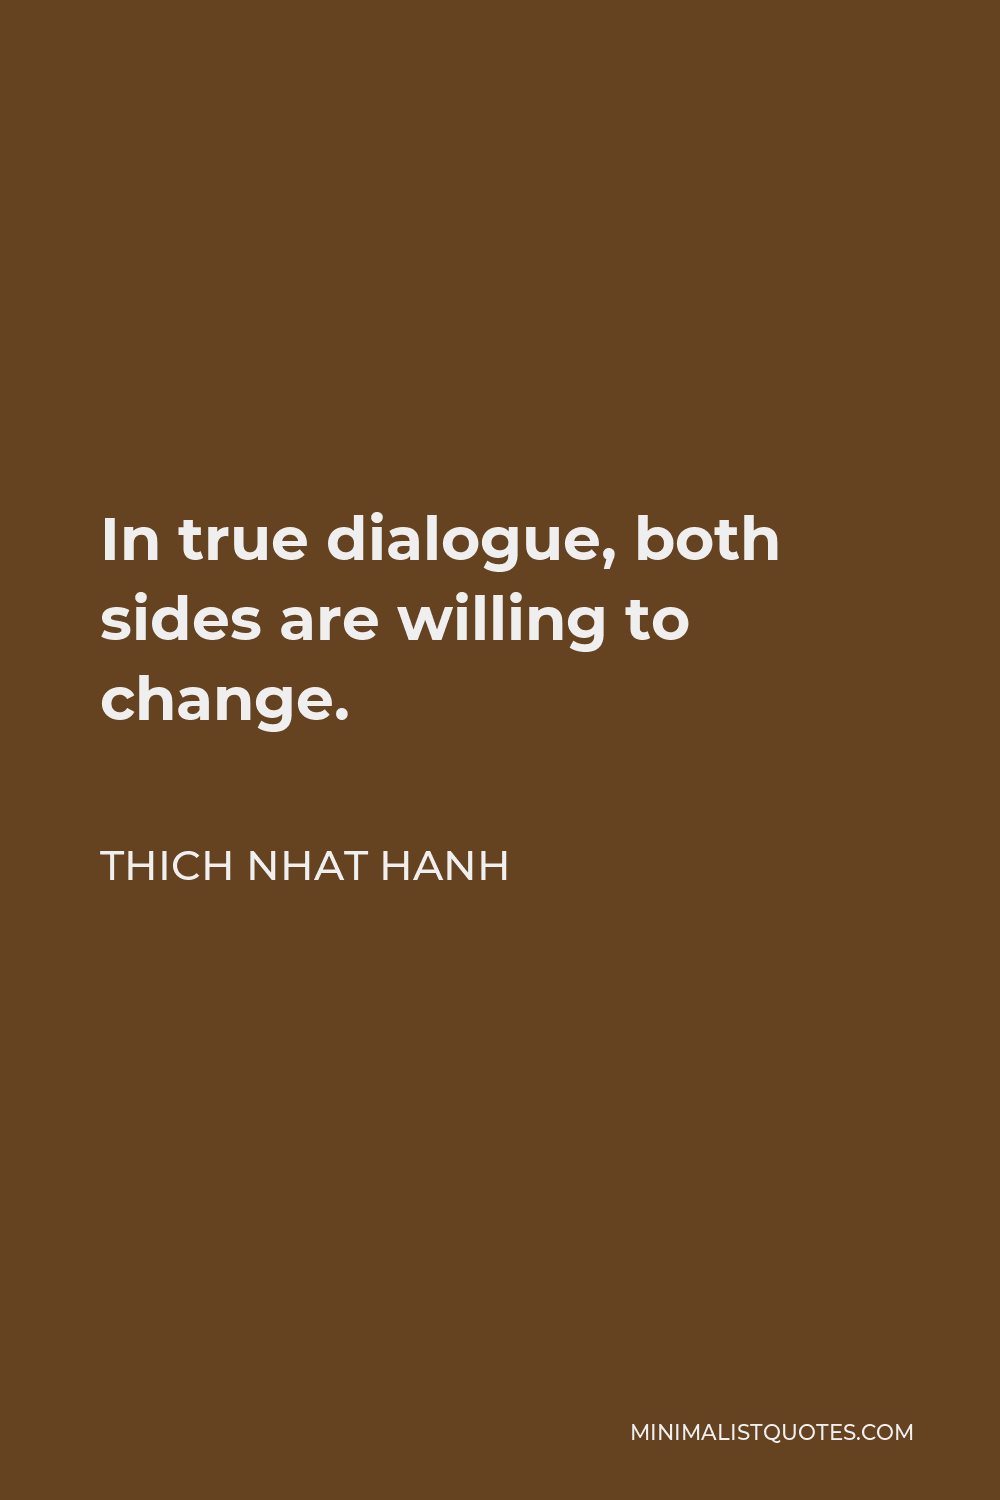 Thich Nhat Hanh Quote - In true dialogue, both sides are willing to change.